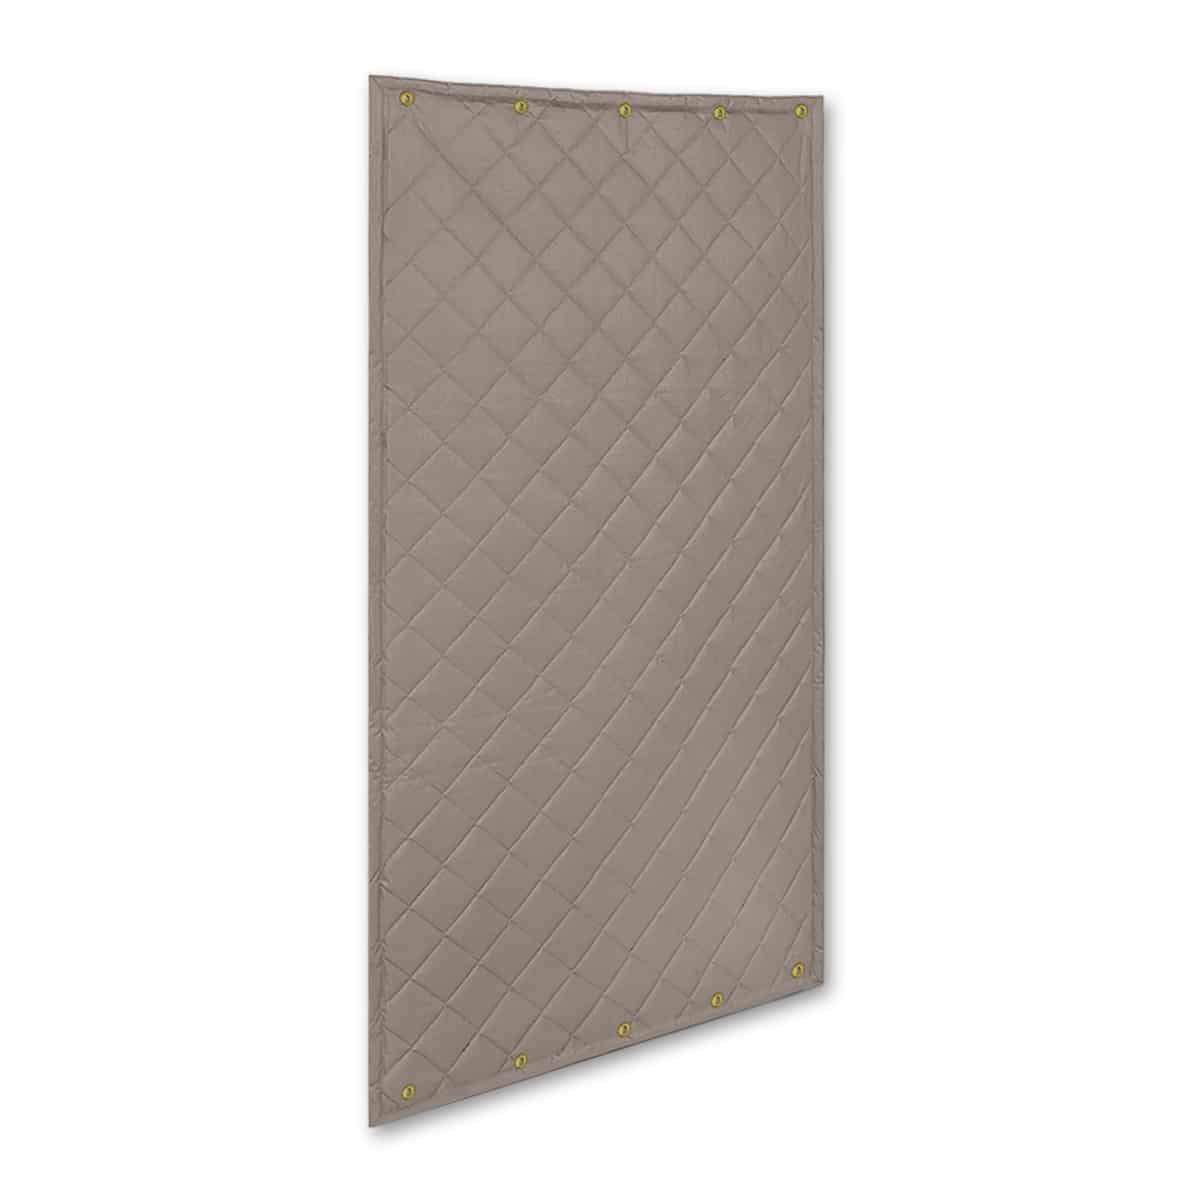 StratiQuilt Fiberglass Quilted Blankets (QFM)  Acoustical Panels &  Soundproofing Materials to Control Sound and Eliminate Noise™